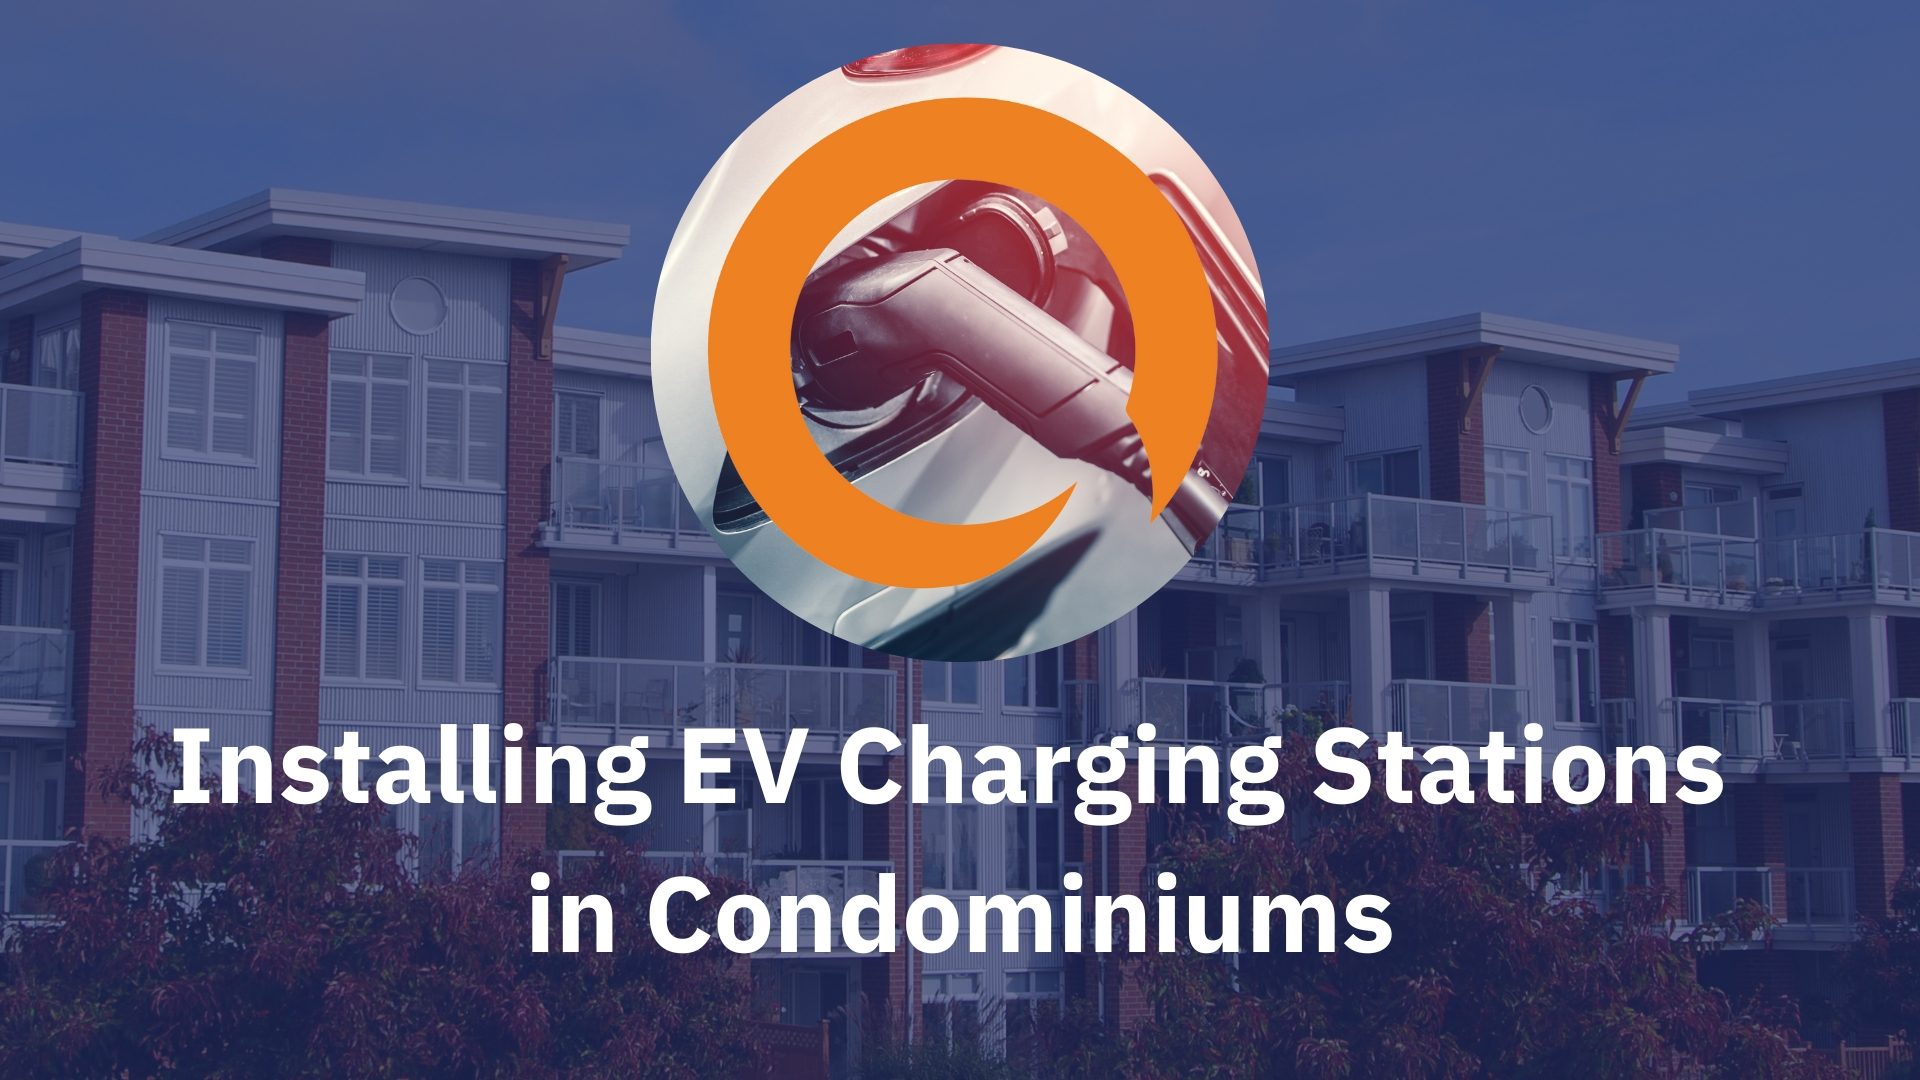 EV Charging Stations in Singapore Condos: Benefits for Residents and Environment, with New Bill Requiring Installations in New Buildings